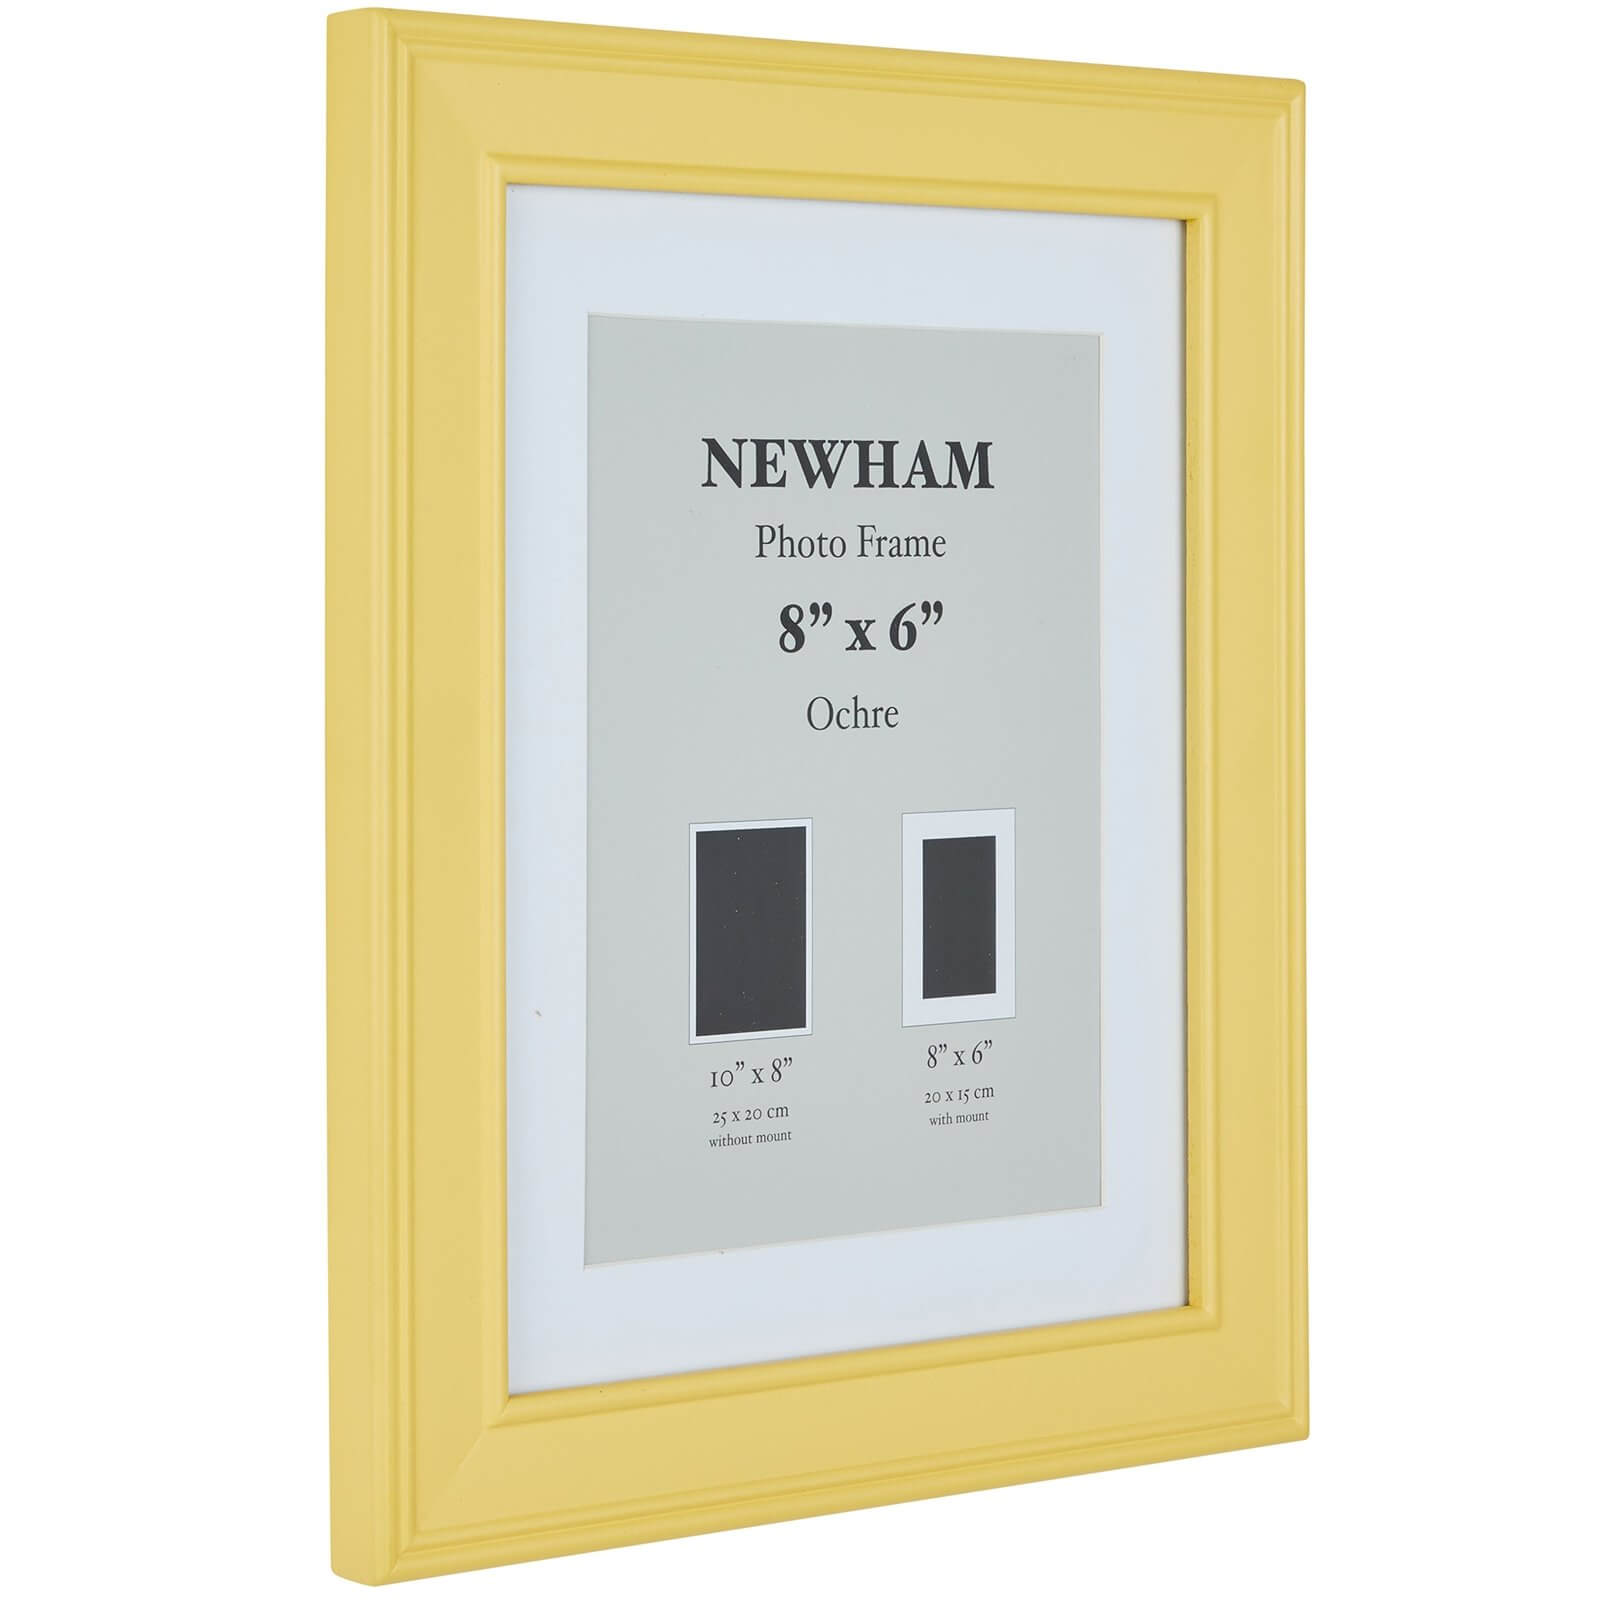 Newham Picture Frame 8 x 6 - Ochre